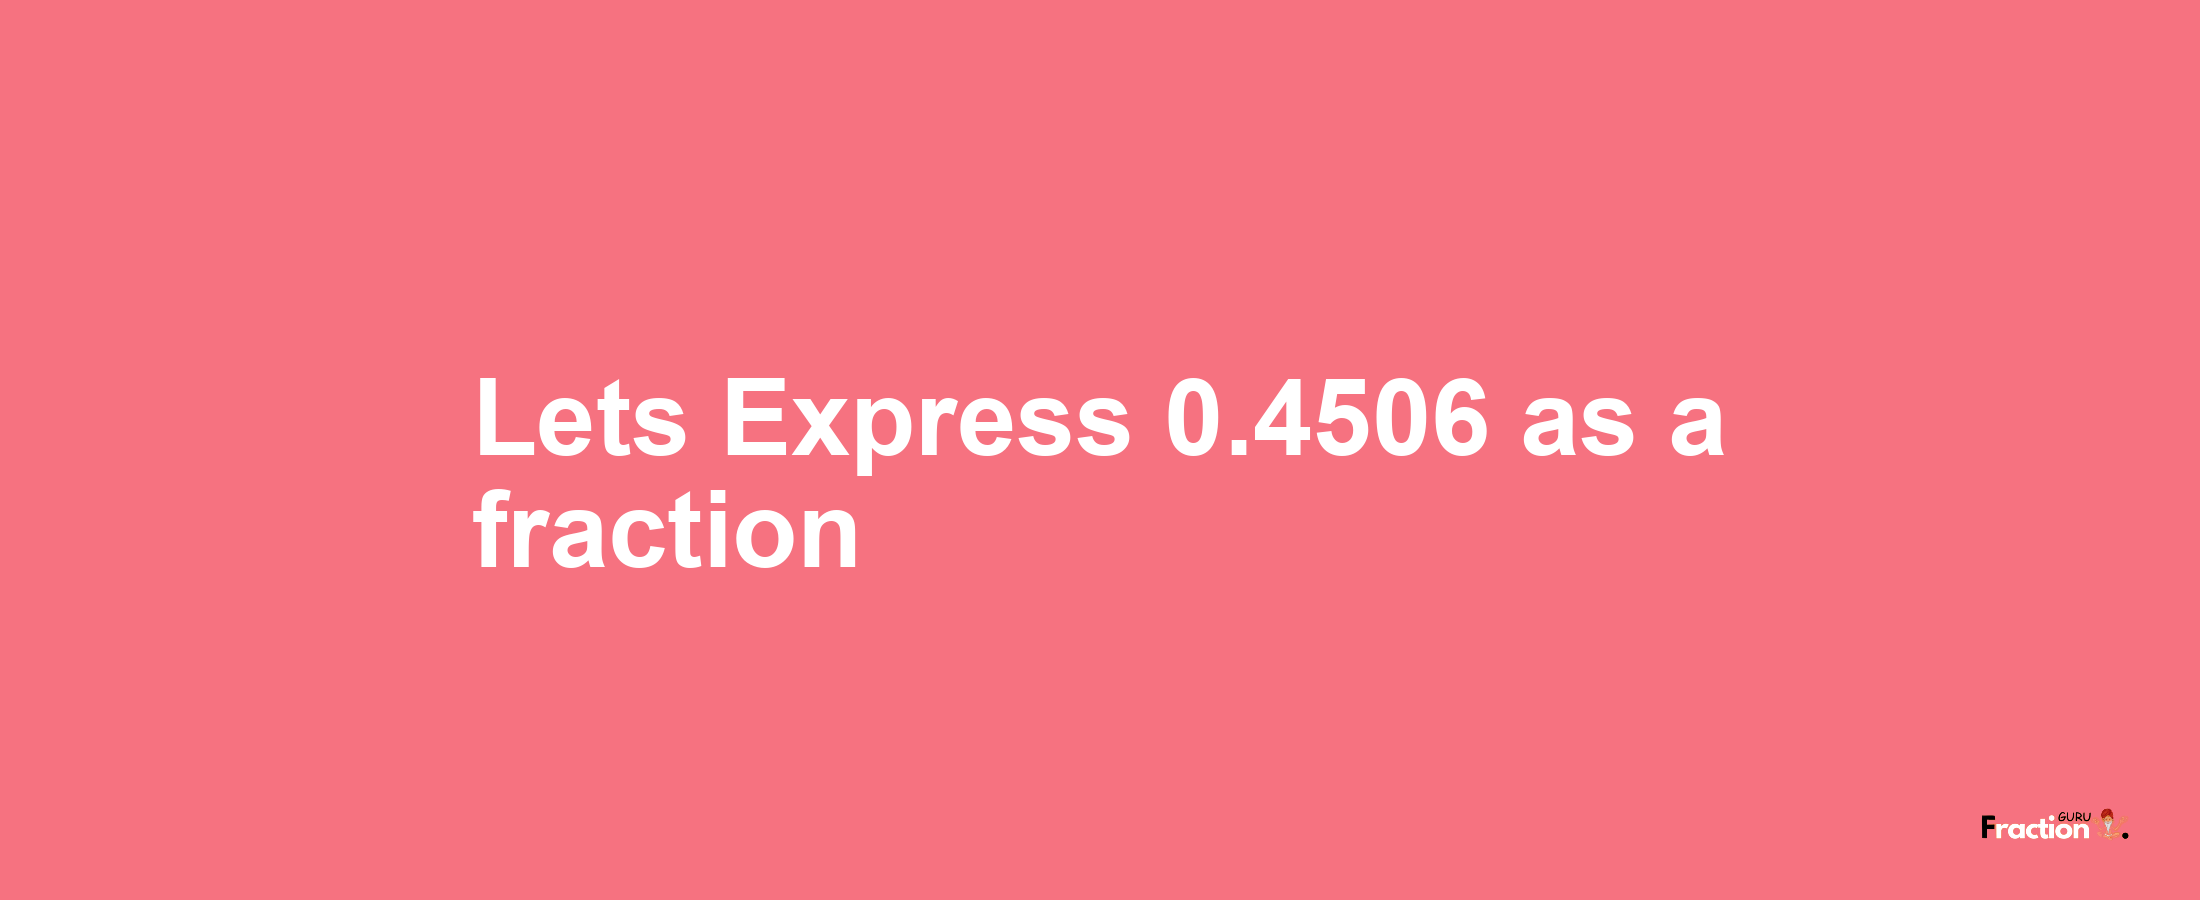 Lets Express 0.4506 as afraction